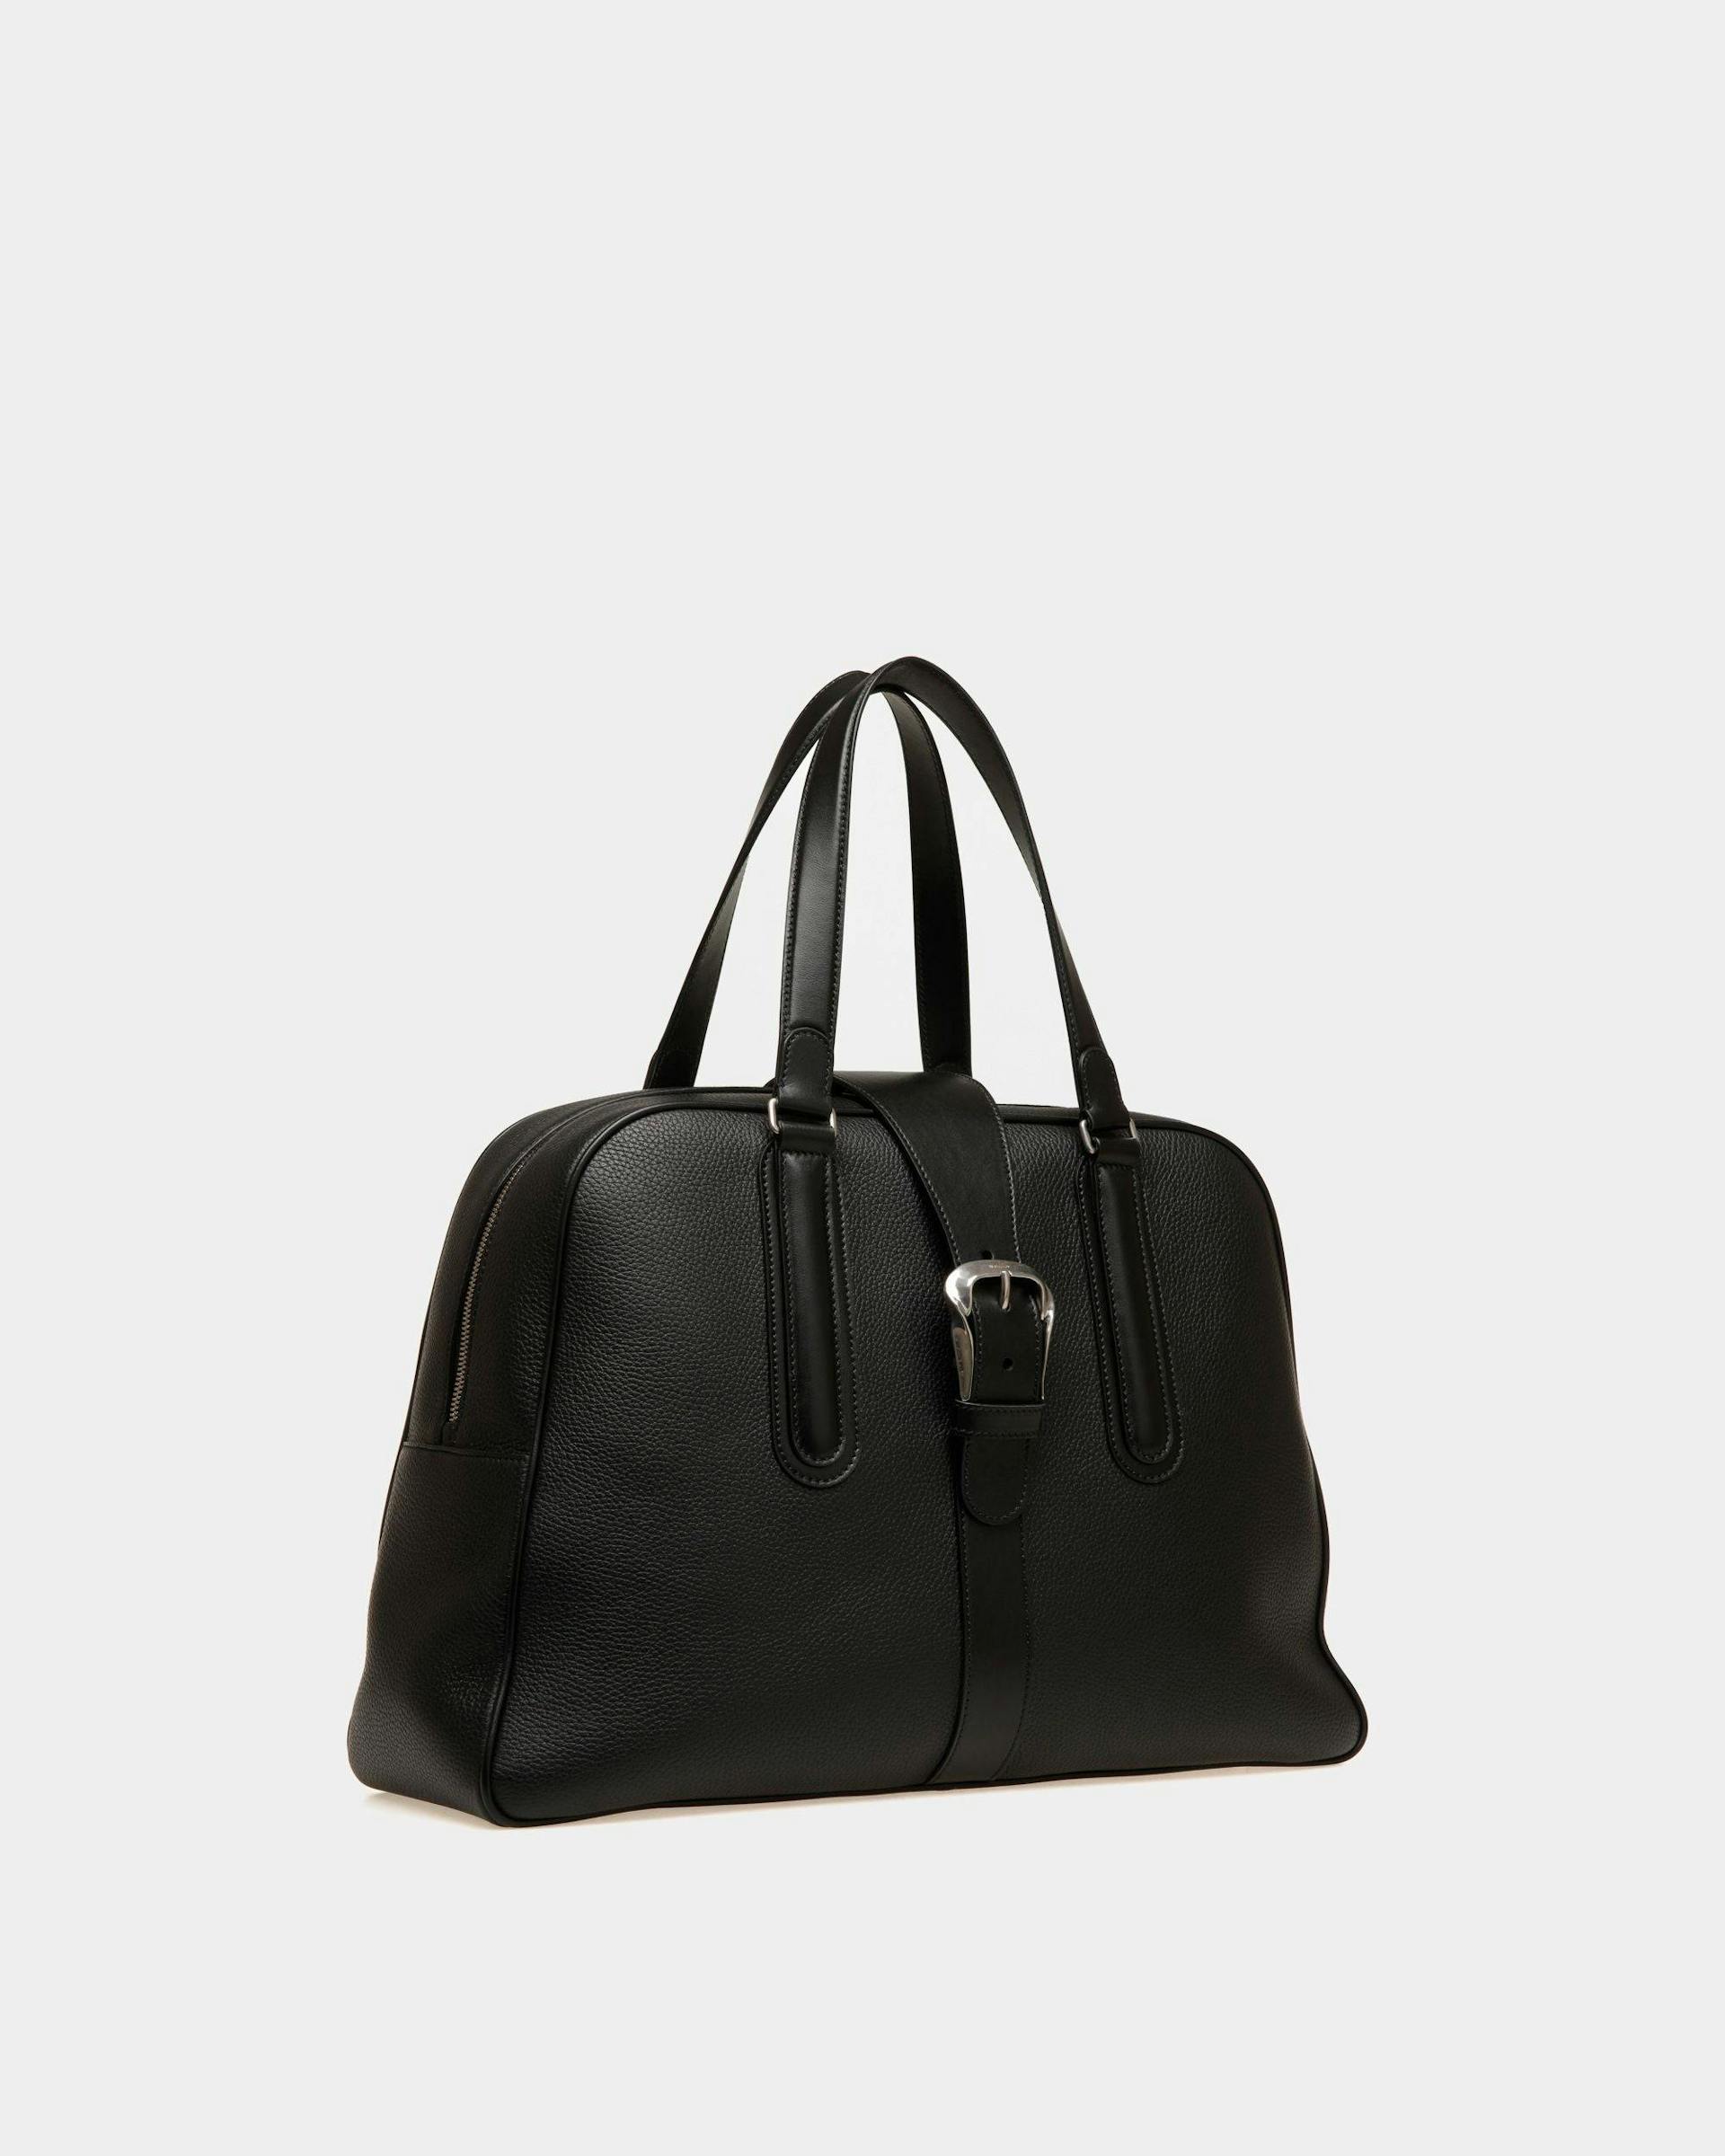 Men's Bowling Bag In Black Leather | Bally | Still Life 3/4 Front